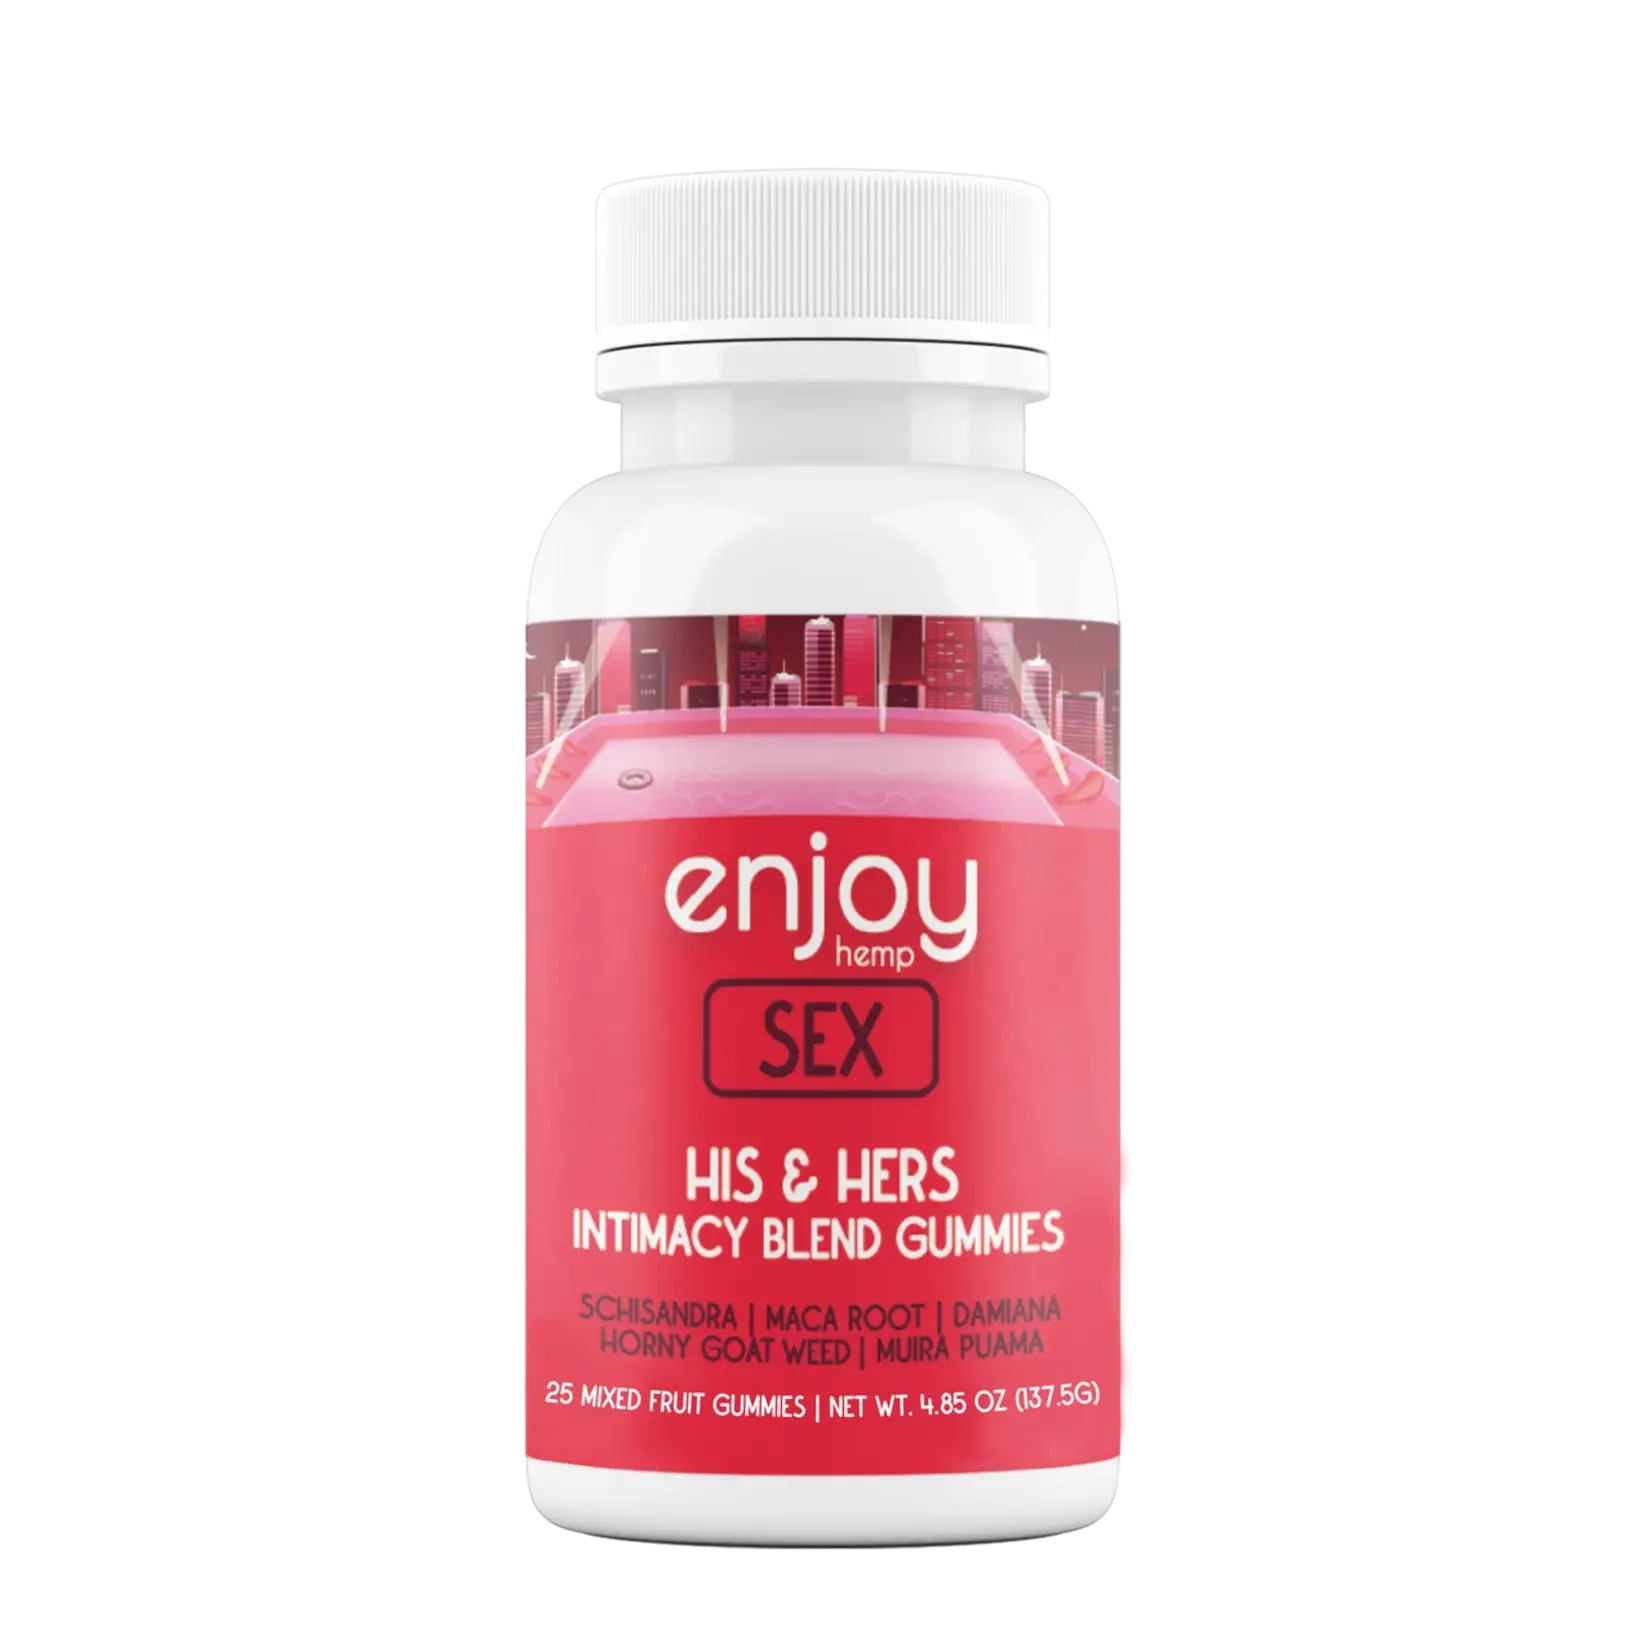 Enjoy Fast Acting SEX Intimacy Blend Gummies for Him and Her Health4Nola - HEALTH 4 NOLA LLC - 3200 Severn Avenue - Suite